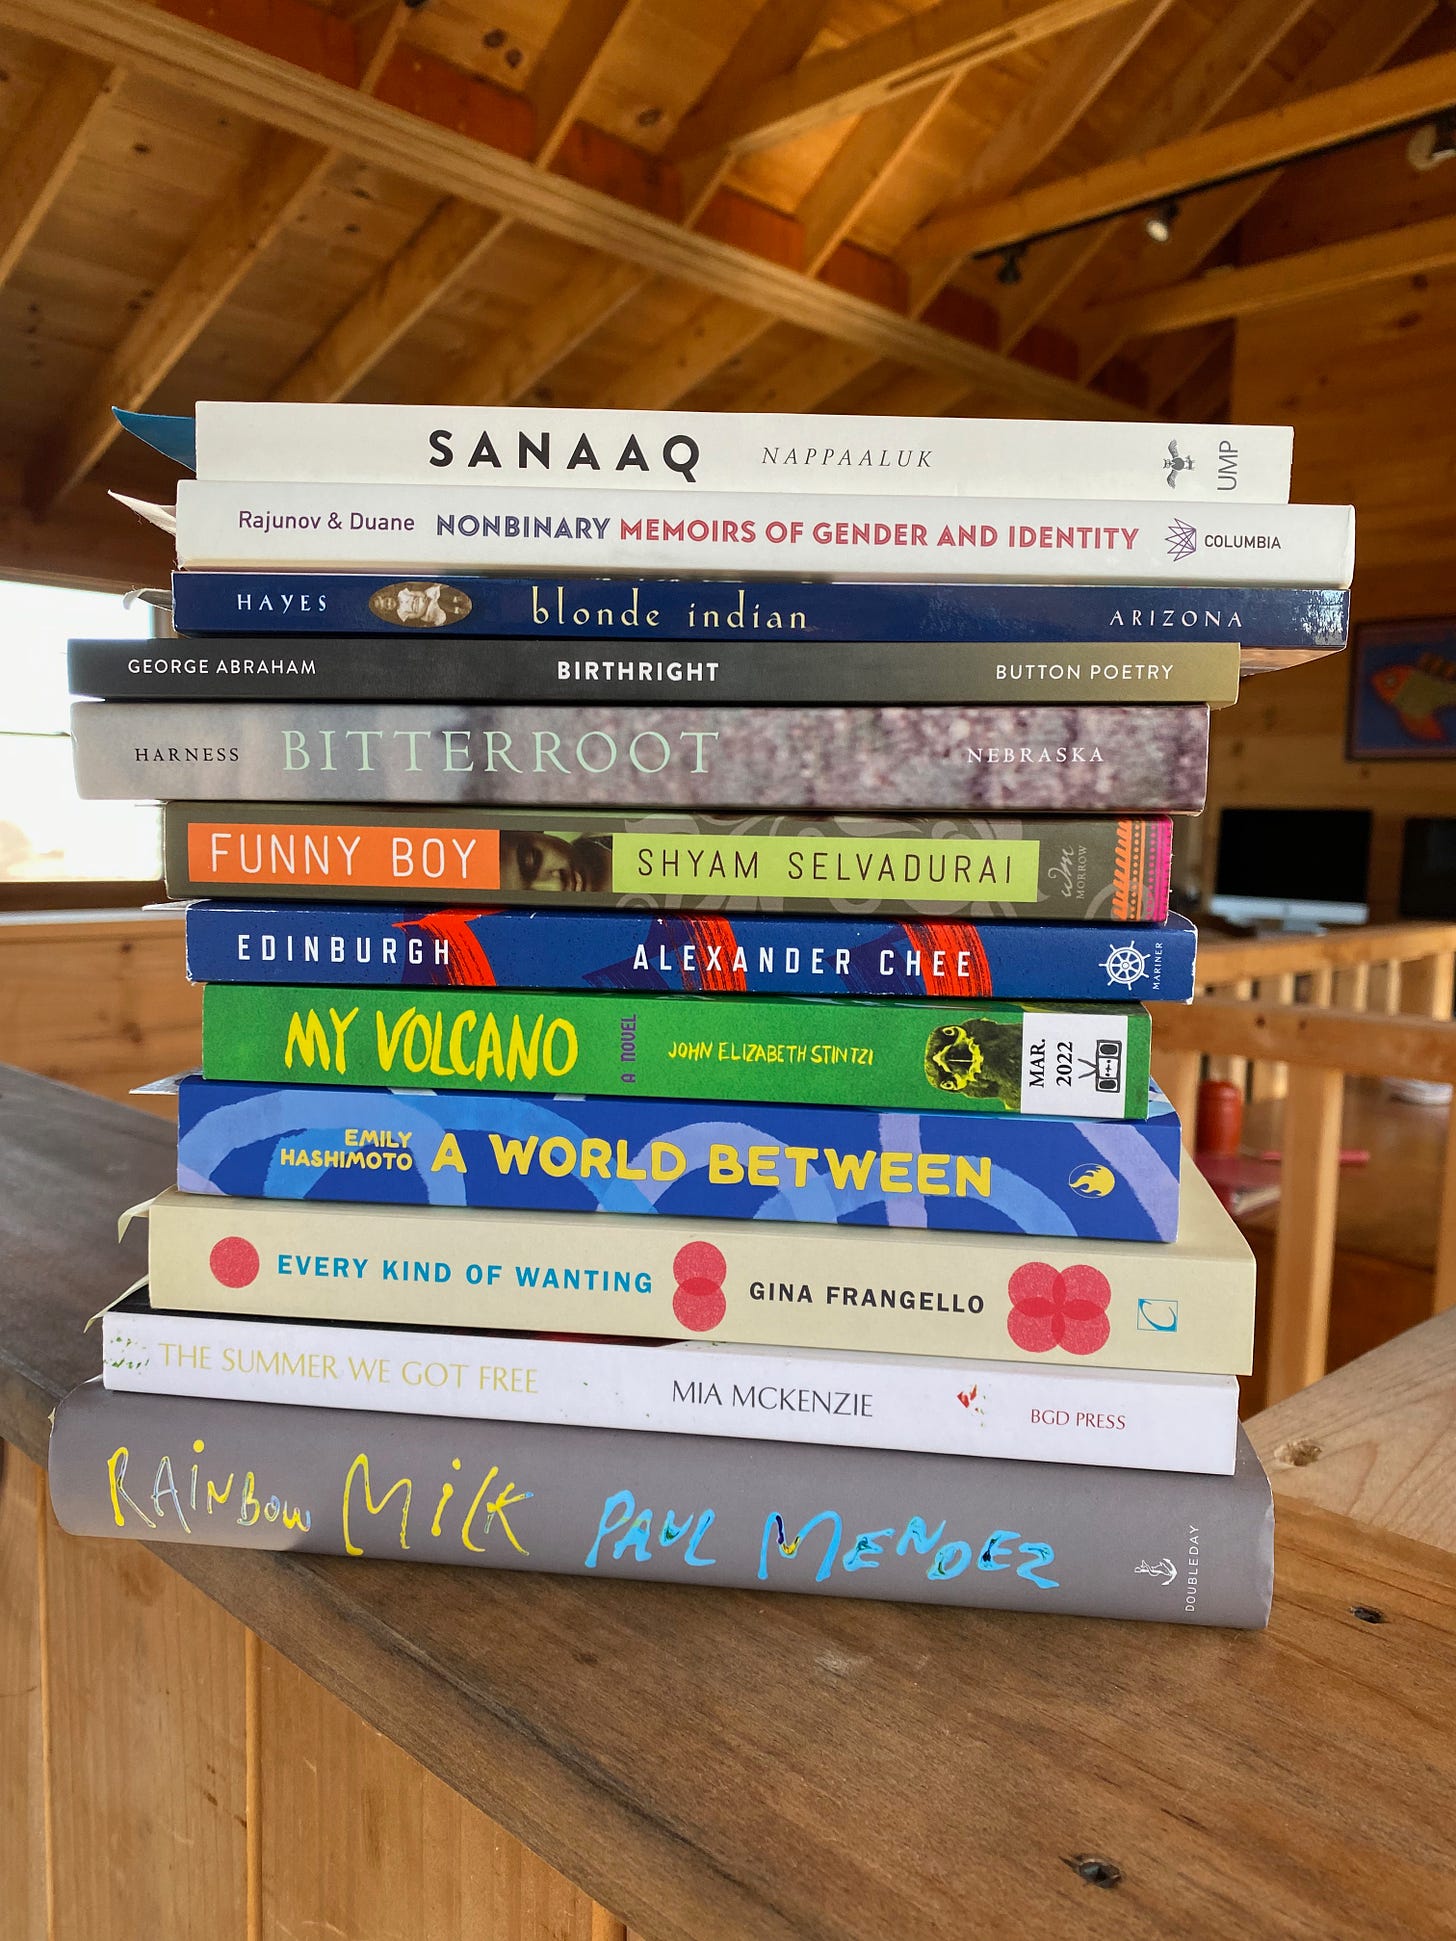 A stack of books on a stair ledge, with wooden roof rafters visible in the background. Books are: Sanaaq, Nonbinary: Memoirs of Gender and Identity, Blonde Indian, Birthright, Bitterroot, Funny Boy, Edinburgh, My Volcano, A World Between, Every Kind of Wanting, The Summer We Got Free, and Rainbow Milk.